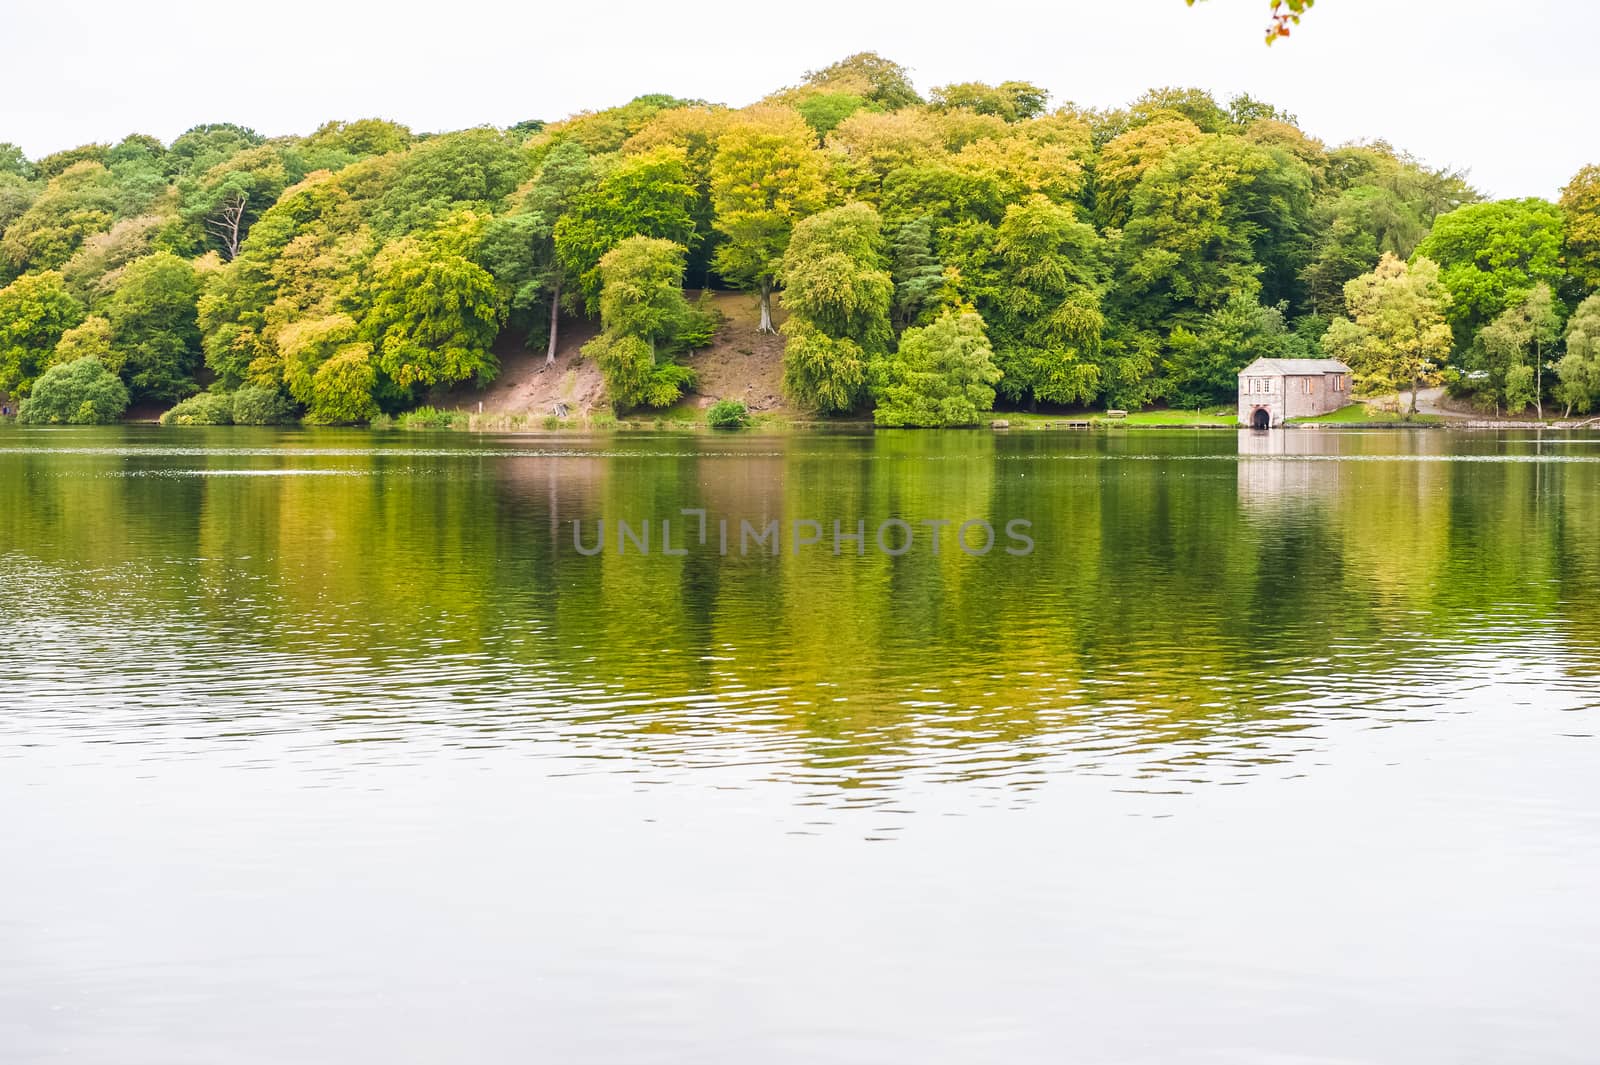 Talkin Tarn. The view across Talkin Tarn, Cumbria England, lake and country park close to the town of Brampton. by paddythegolfer